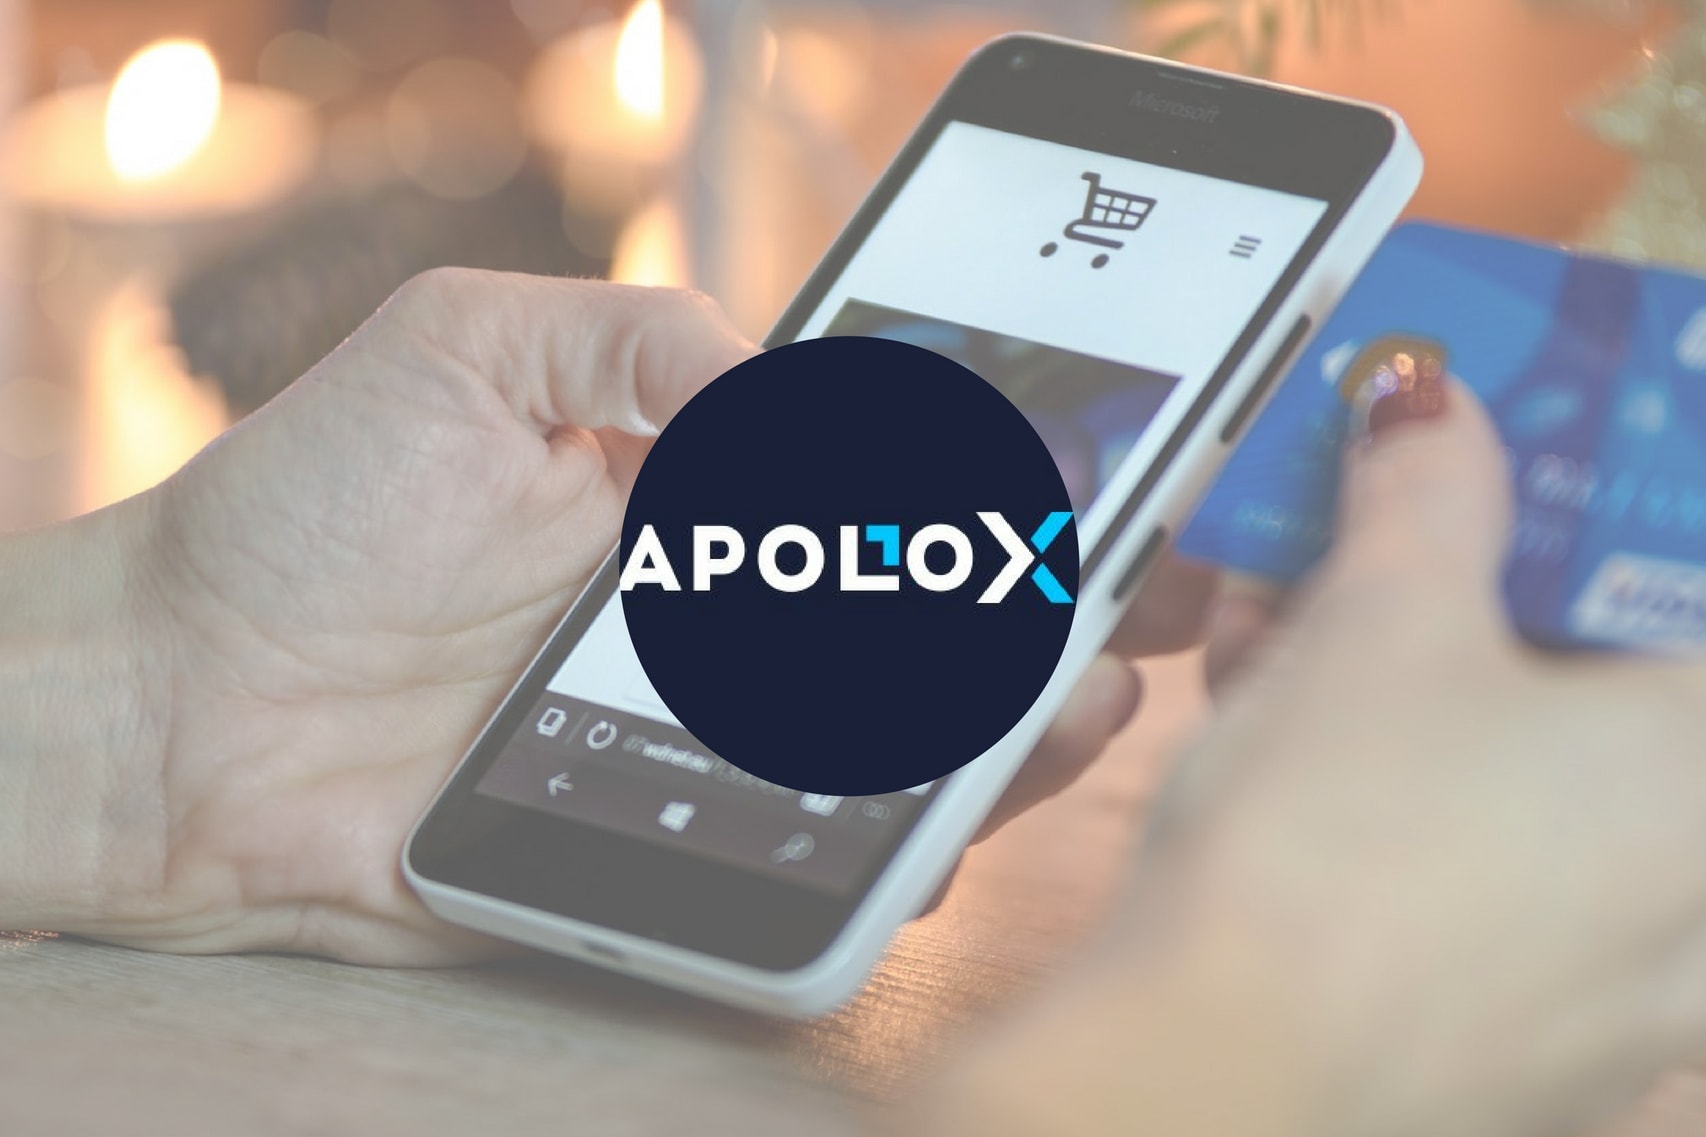 What is ApolloX?